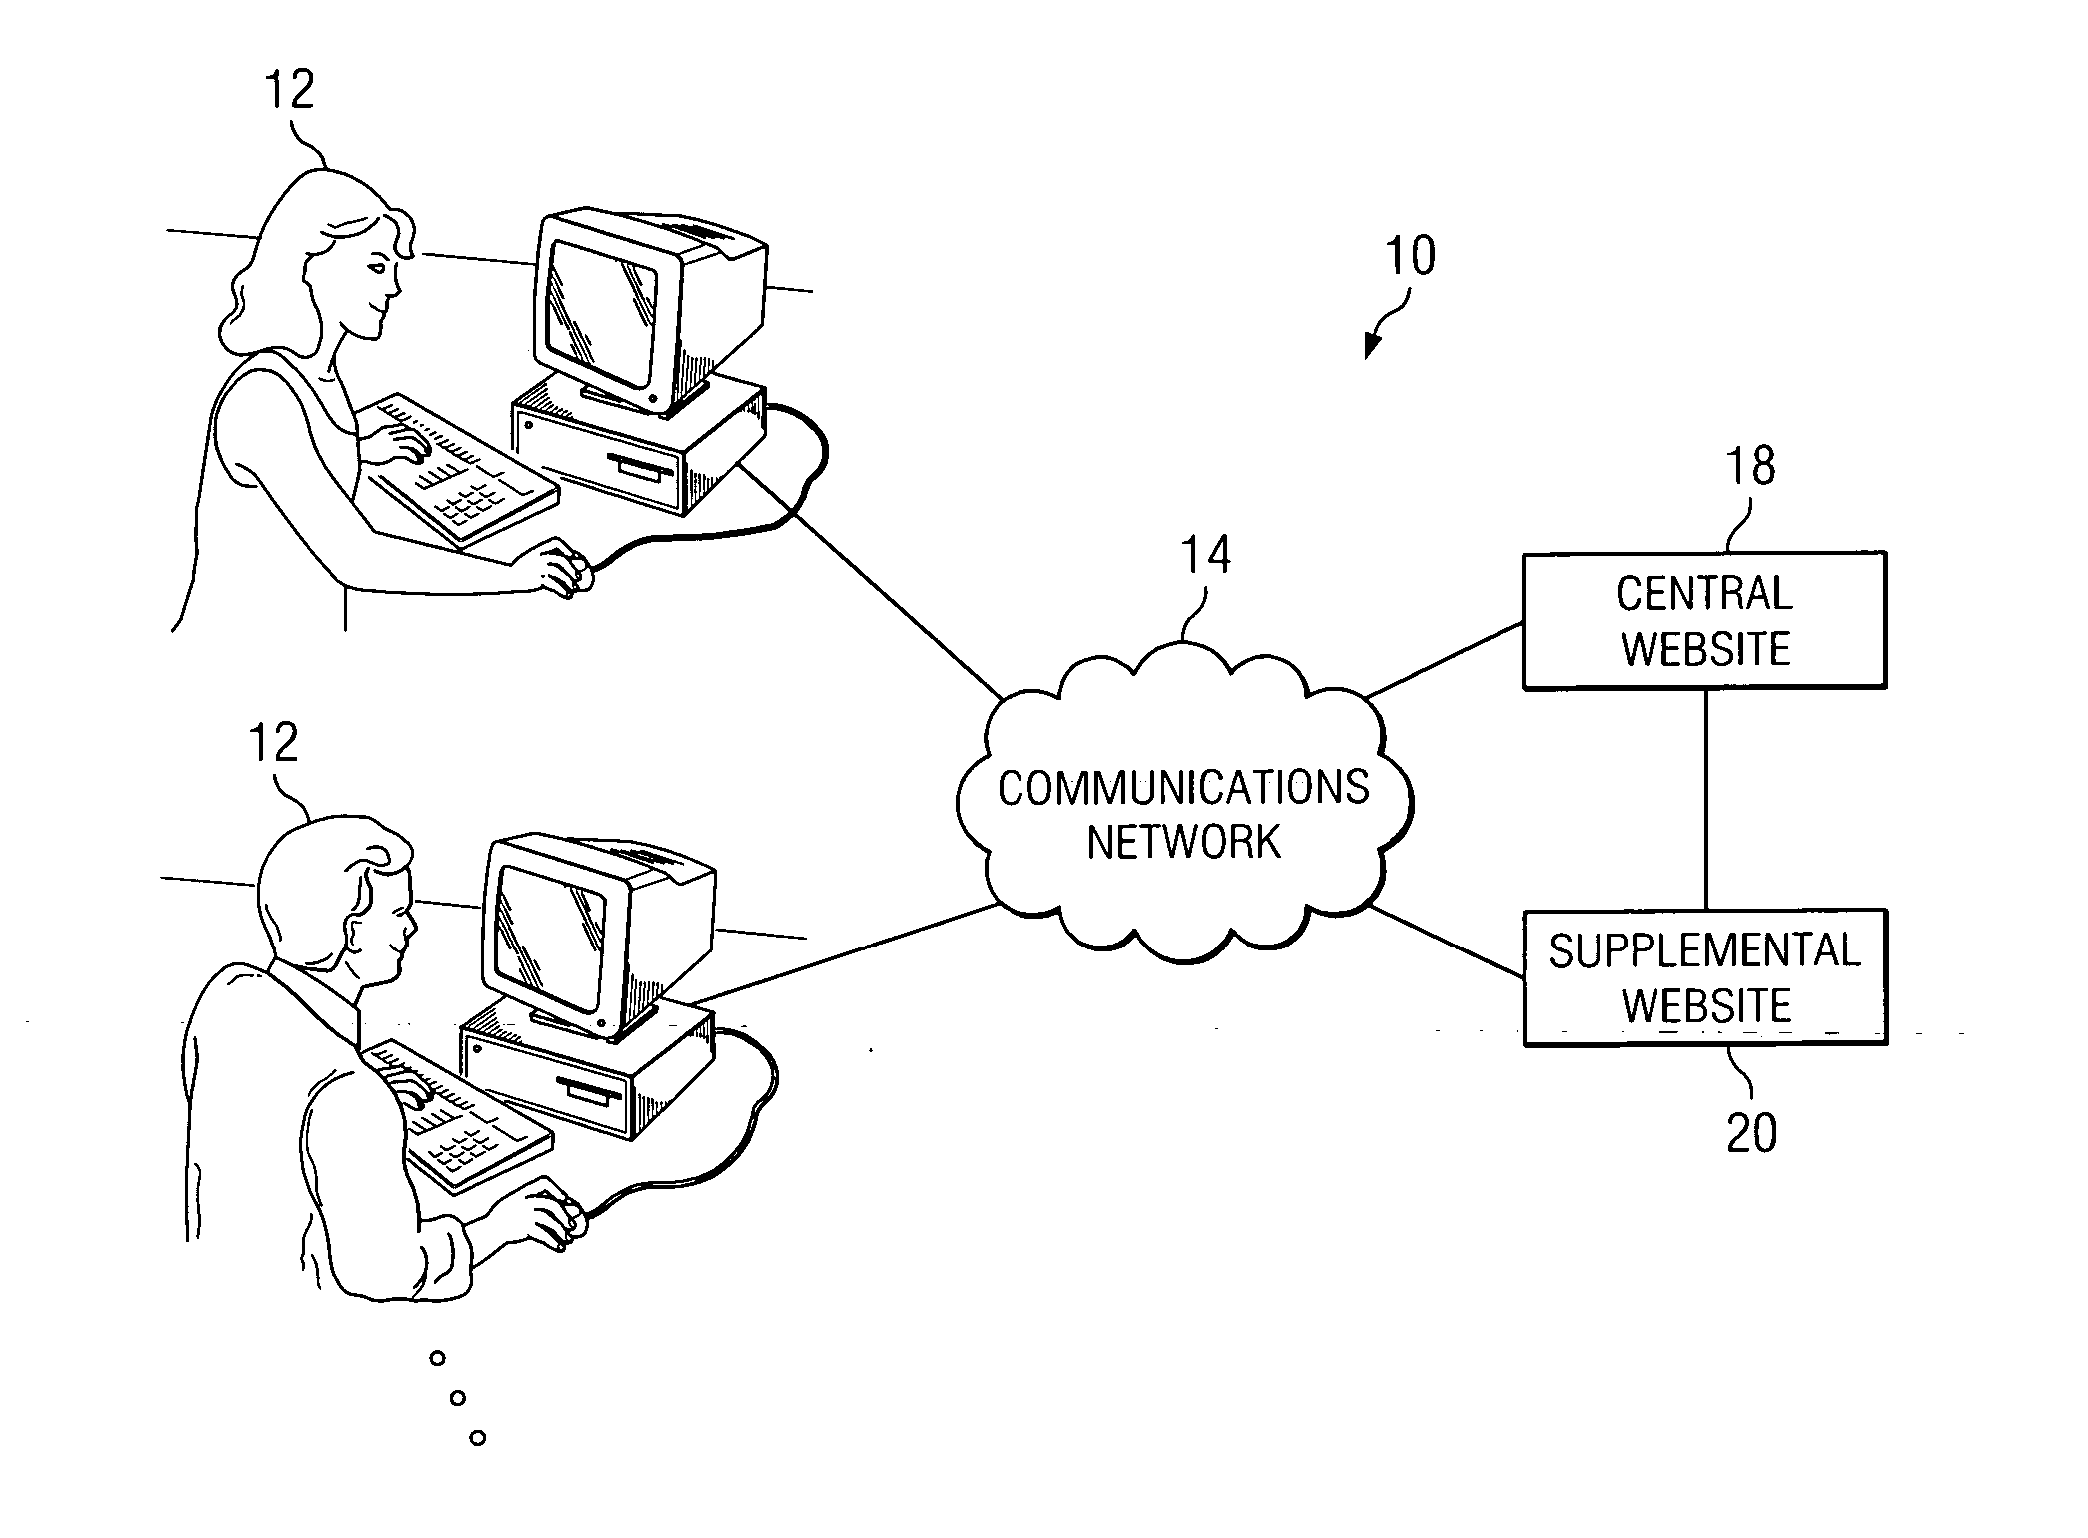 System and method for providing on-line dating features in a network environment